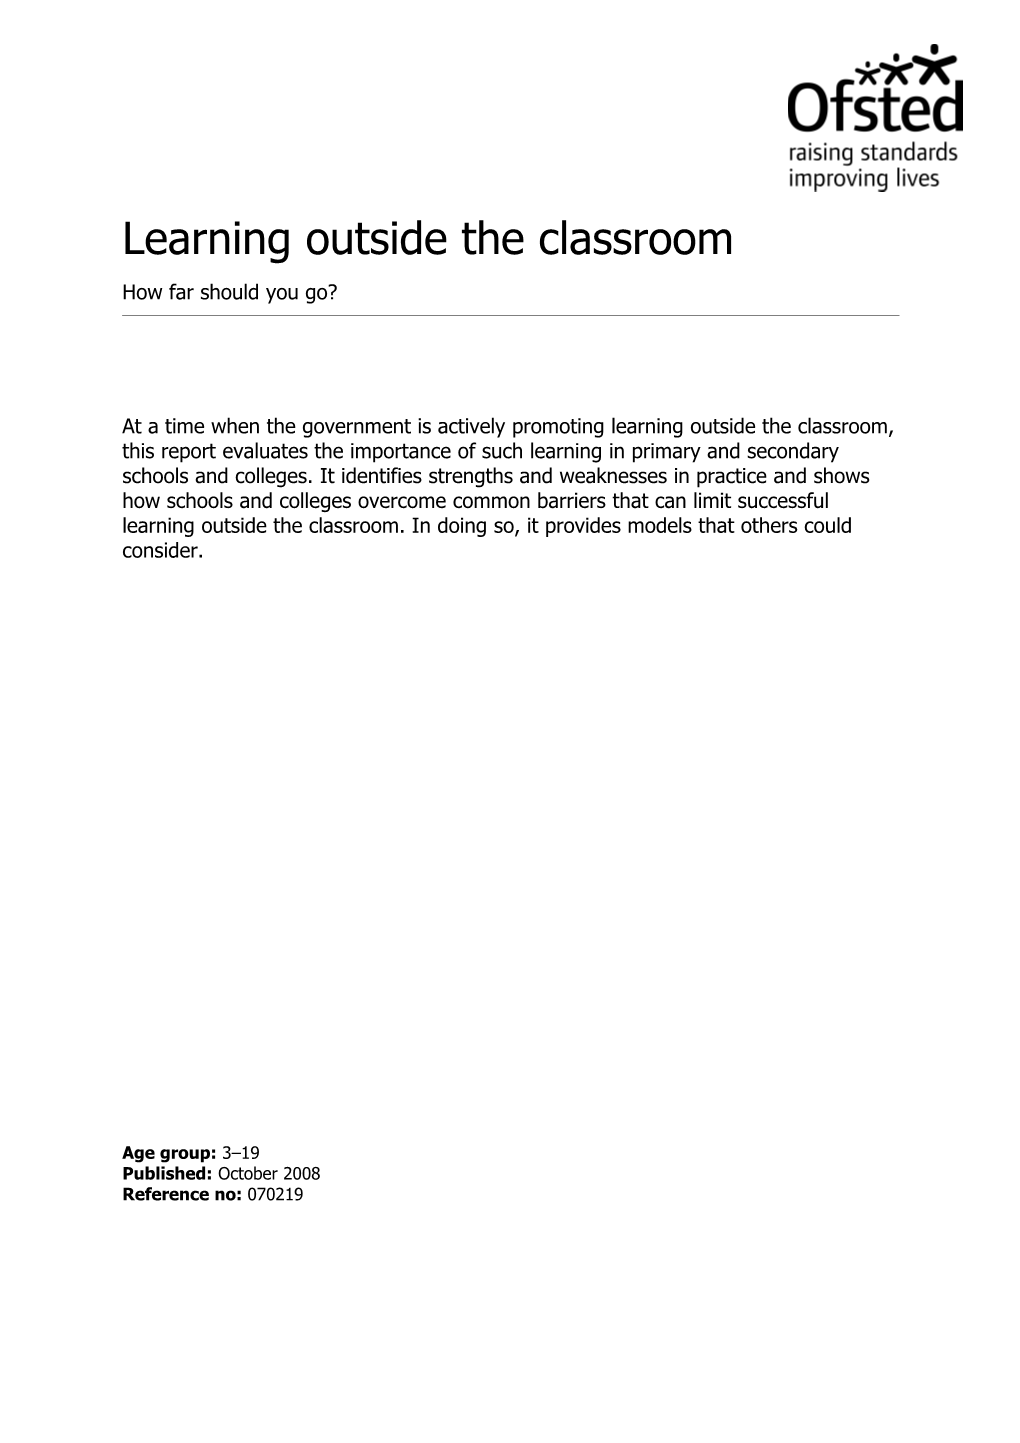 Learning Outside the Classroom